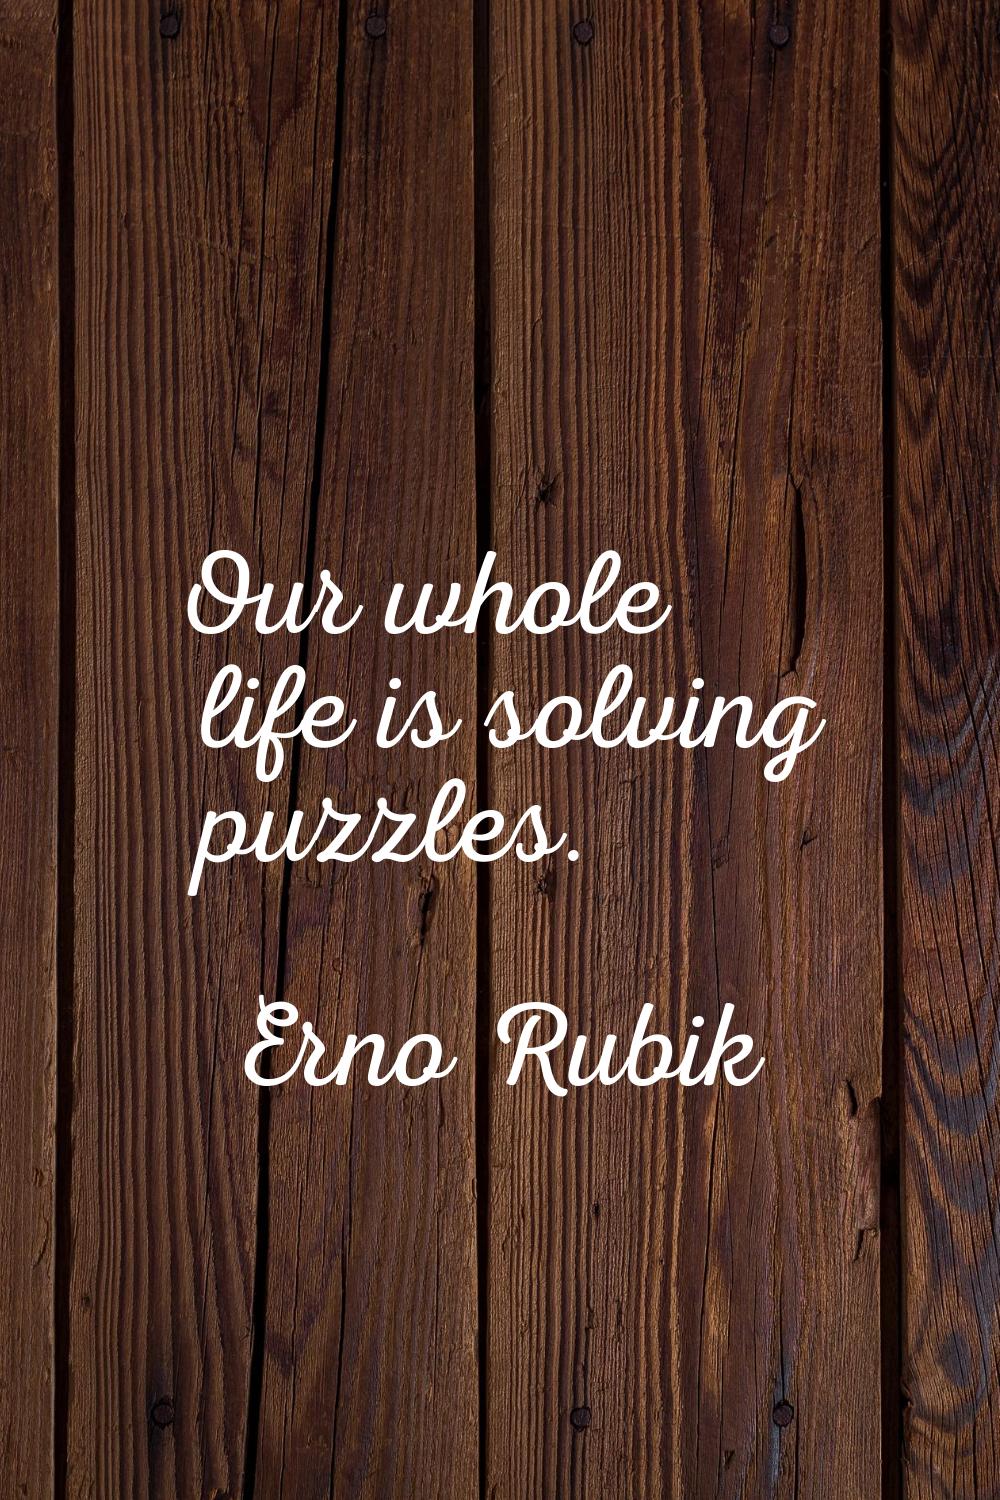 Our whole life is solving puzzles.